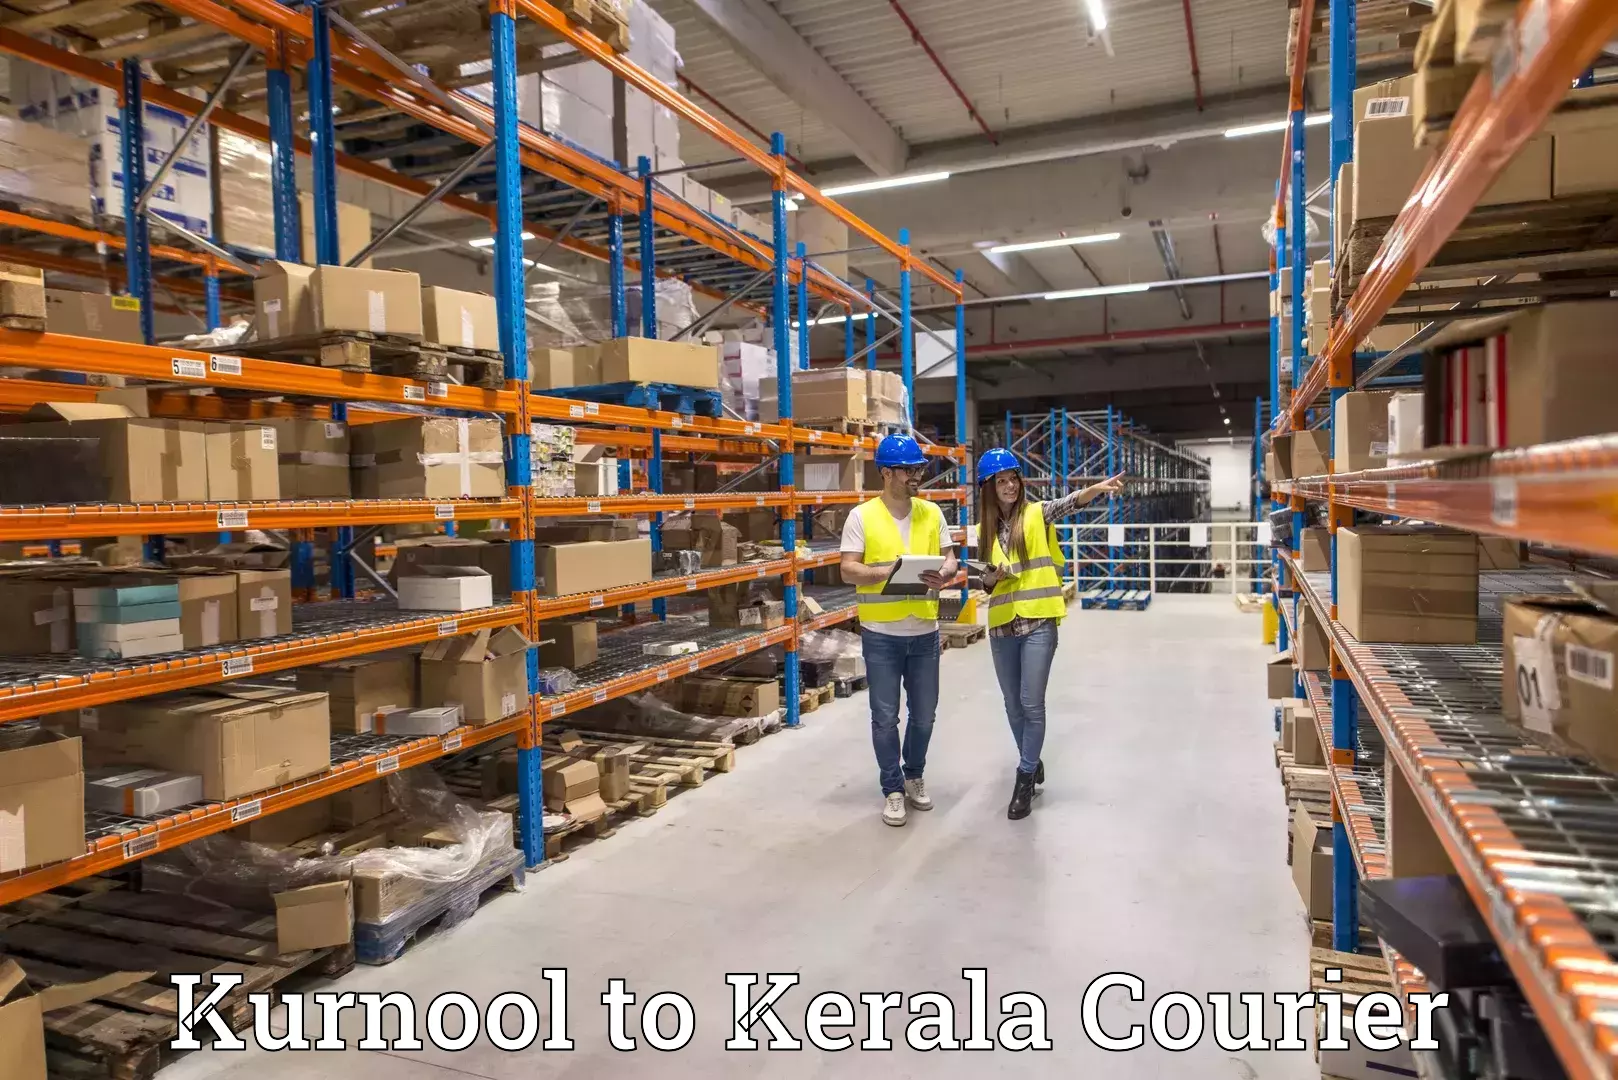 Expedited parcel delivery in Kurnool to Kochi